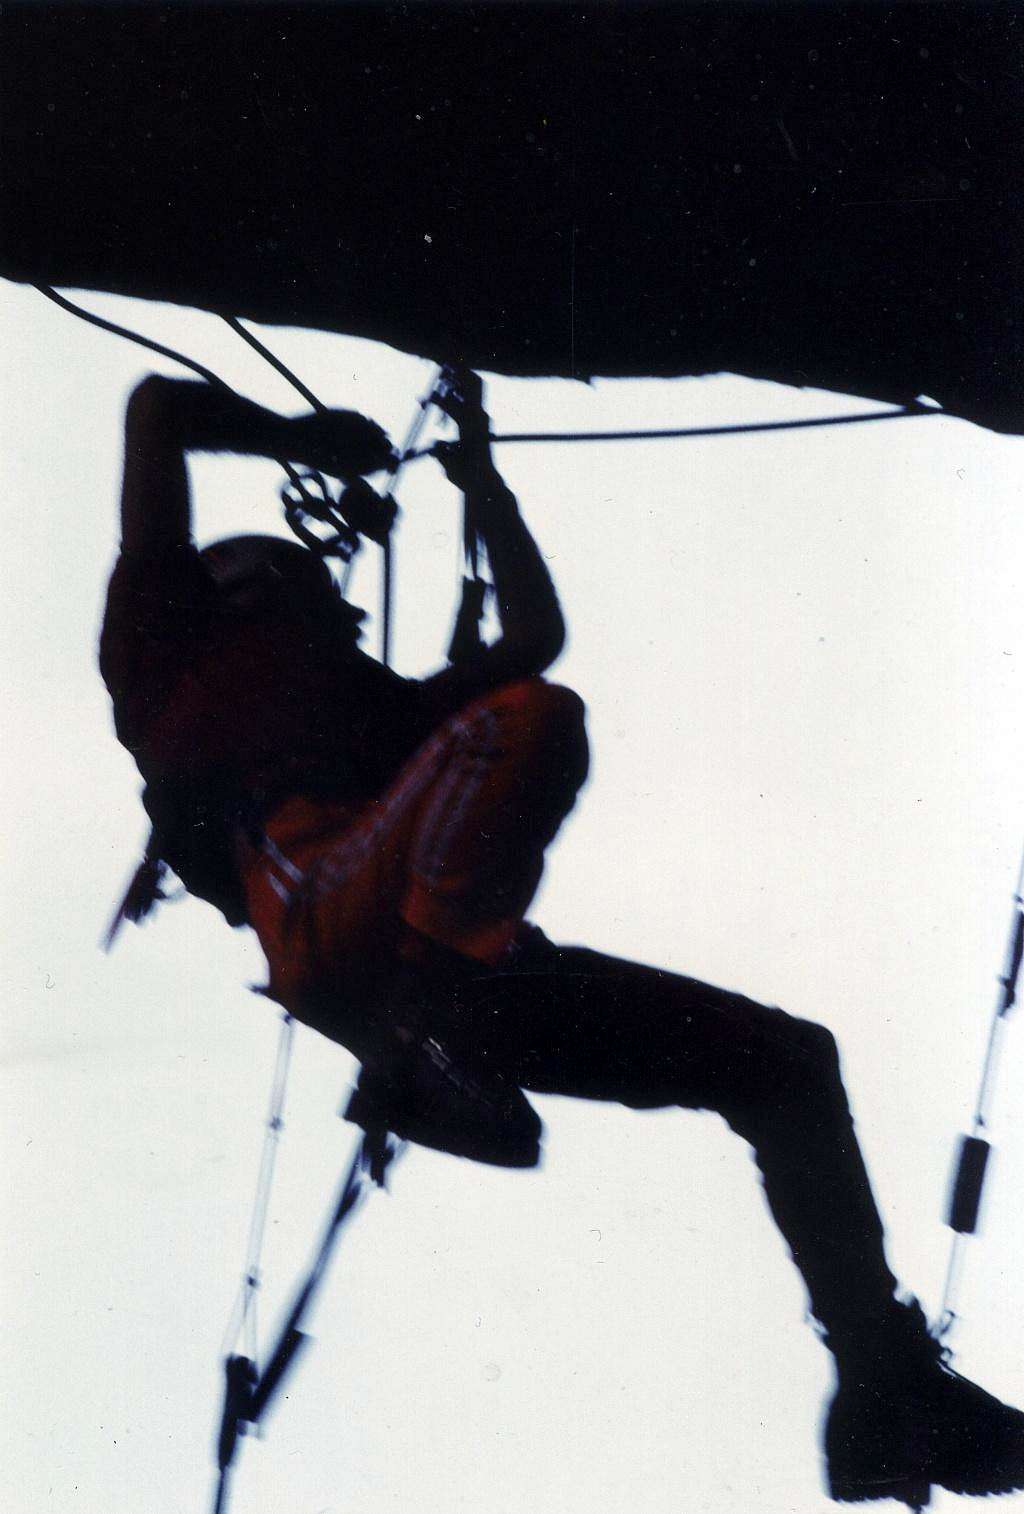 Climbing/3 Great Cliff by an only & sole old rope 1978